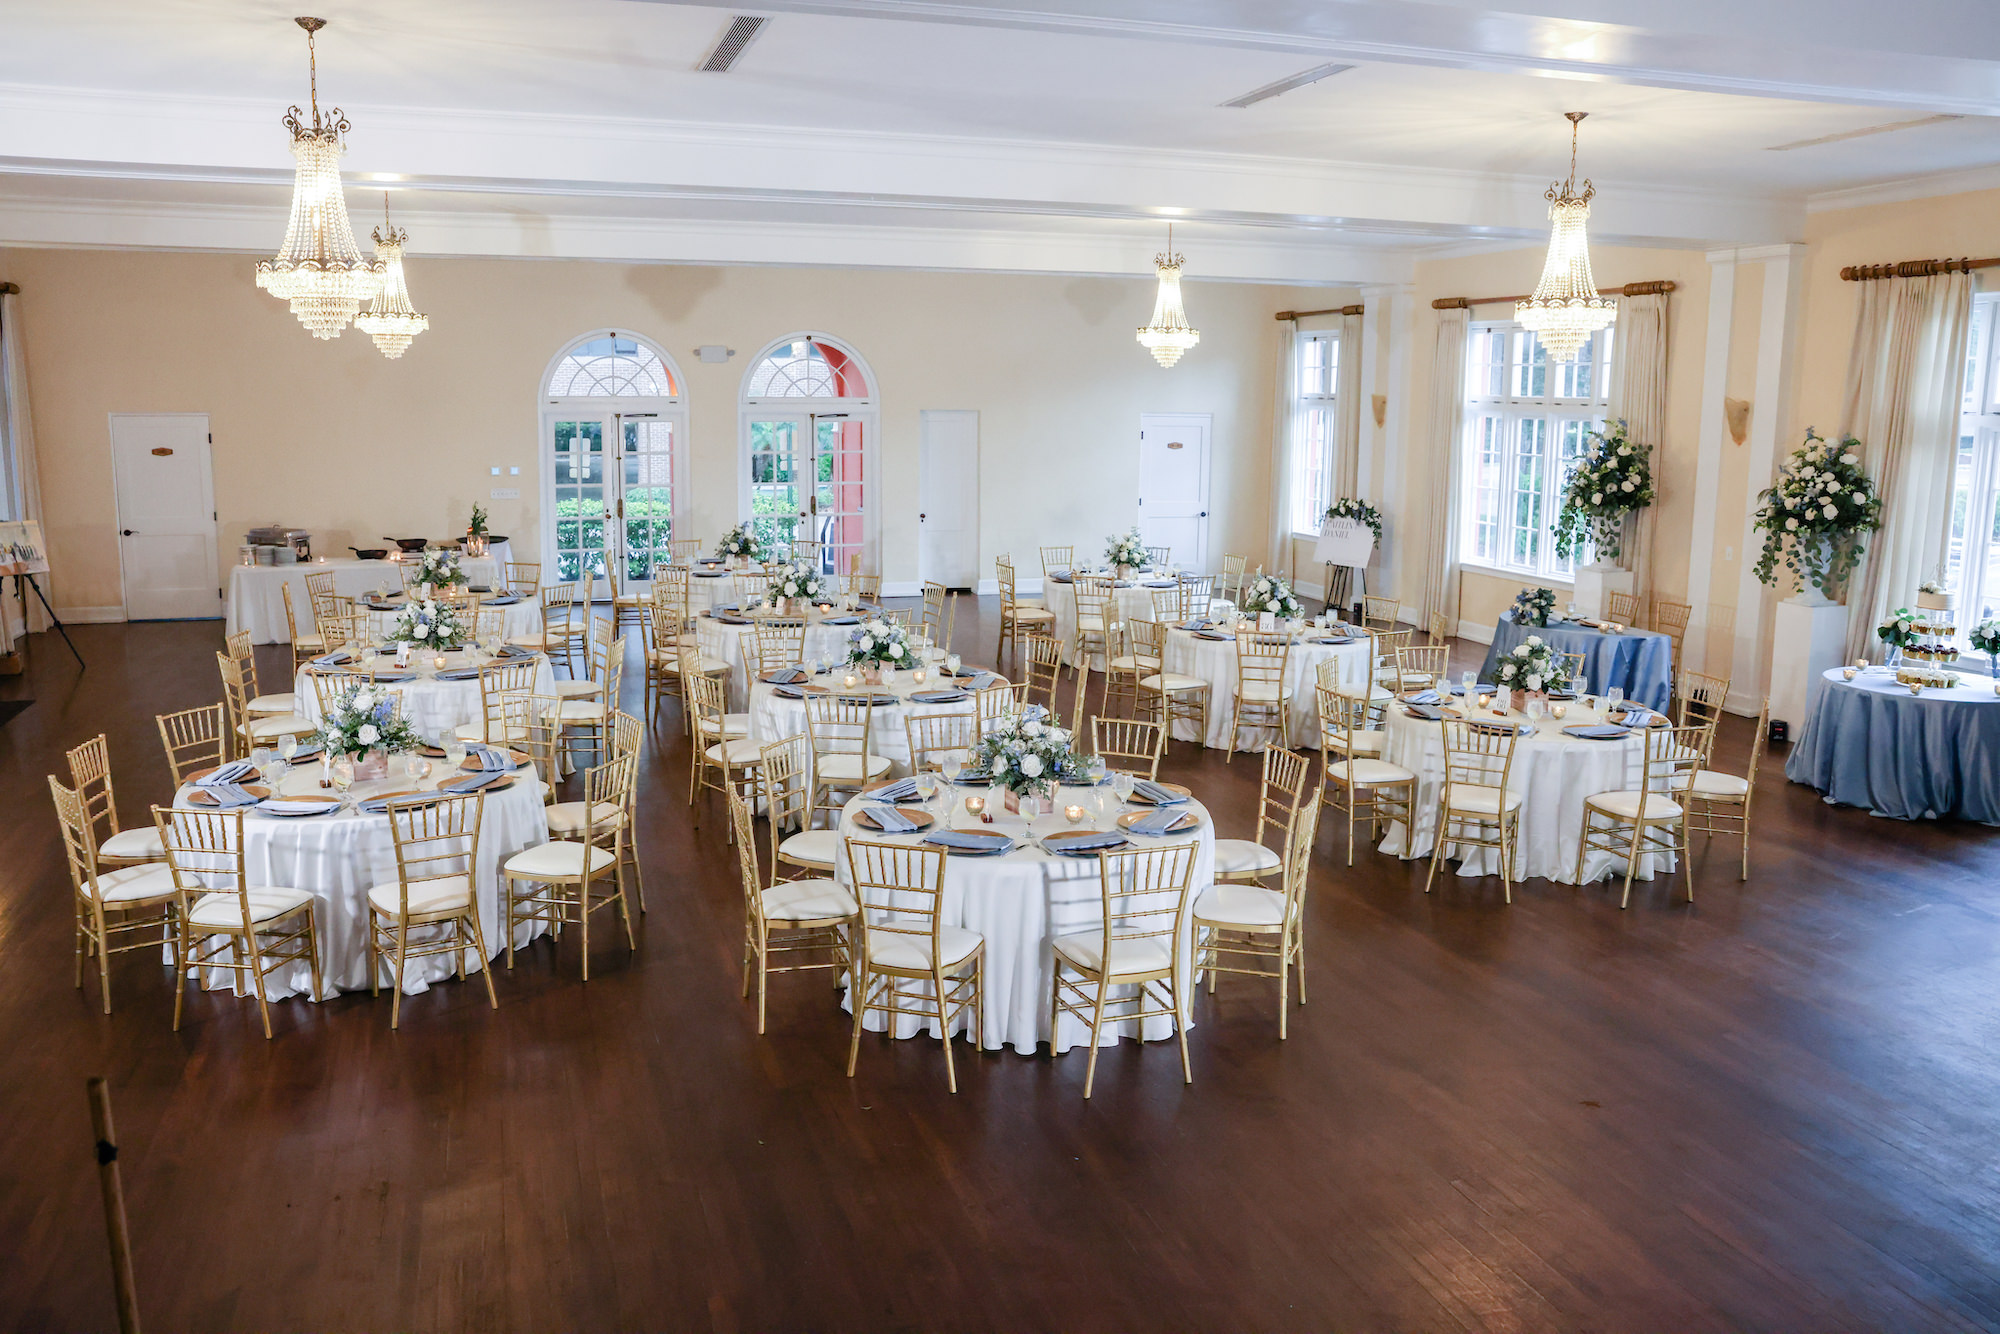 Classic Indoor Ballroom Pastel Blue and White Wedding Reception | Historic Tampa Bay Venue The Orlo | Caterer Olympia Catering